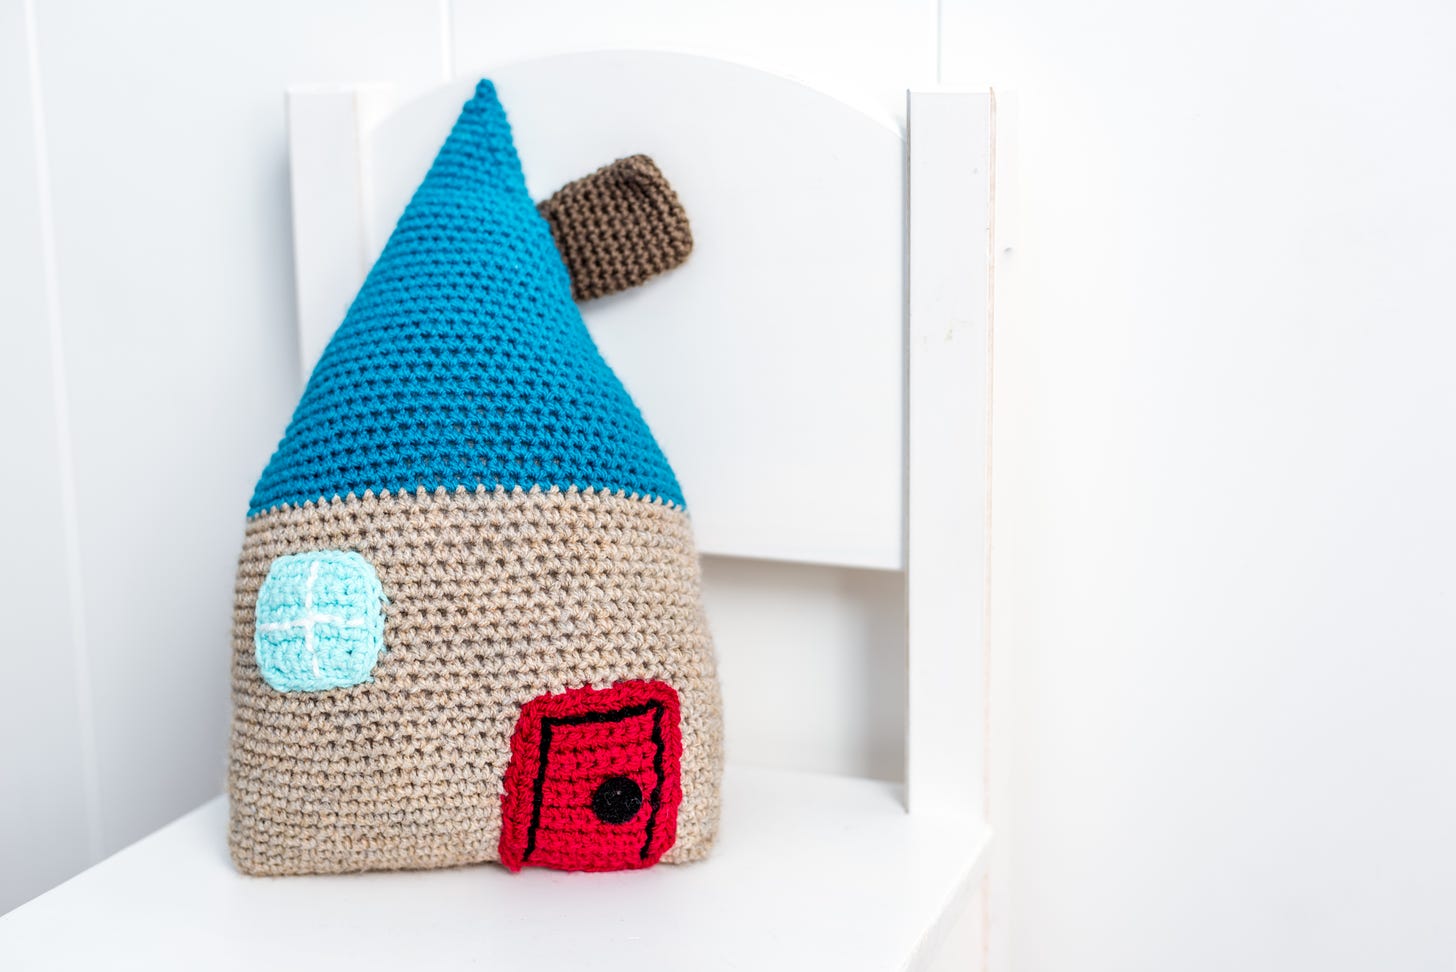 A small knit fairy house with a red door, blue roof and brown chimney. It looks dumb but I want it.